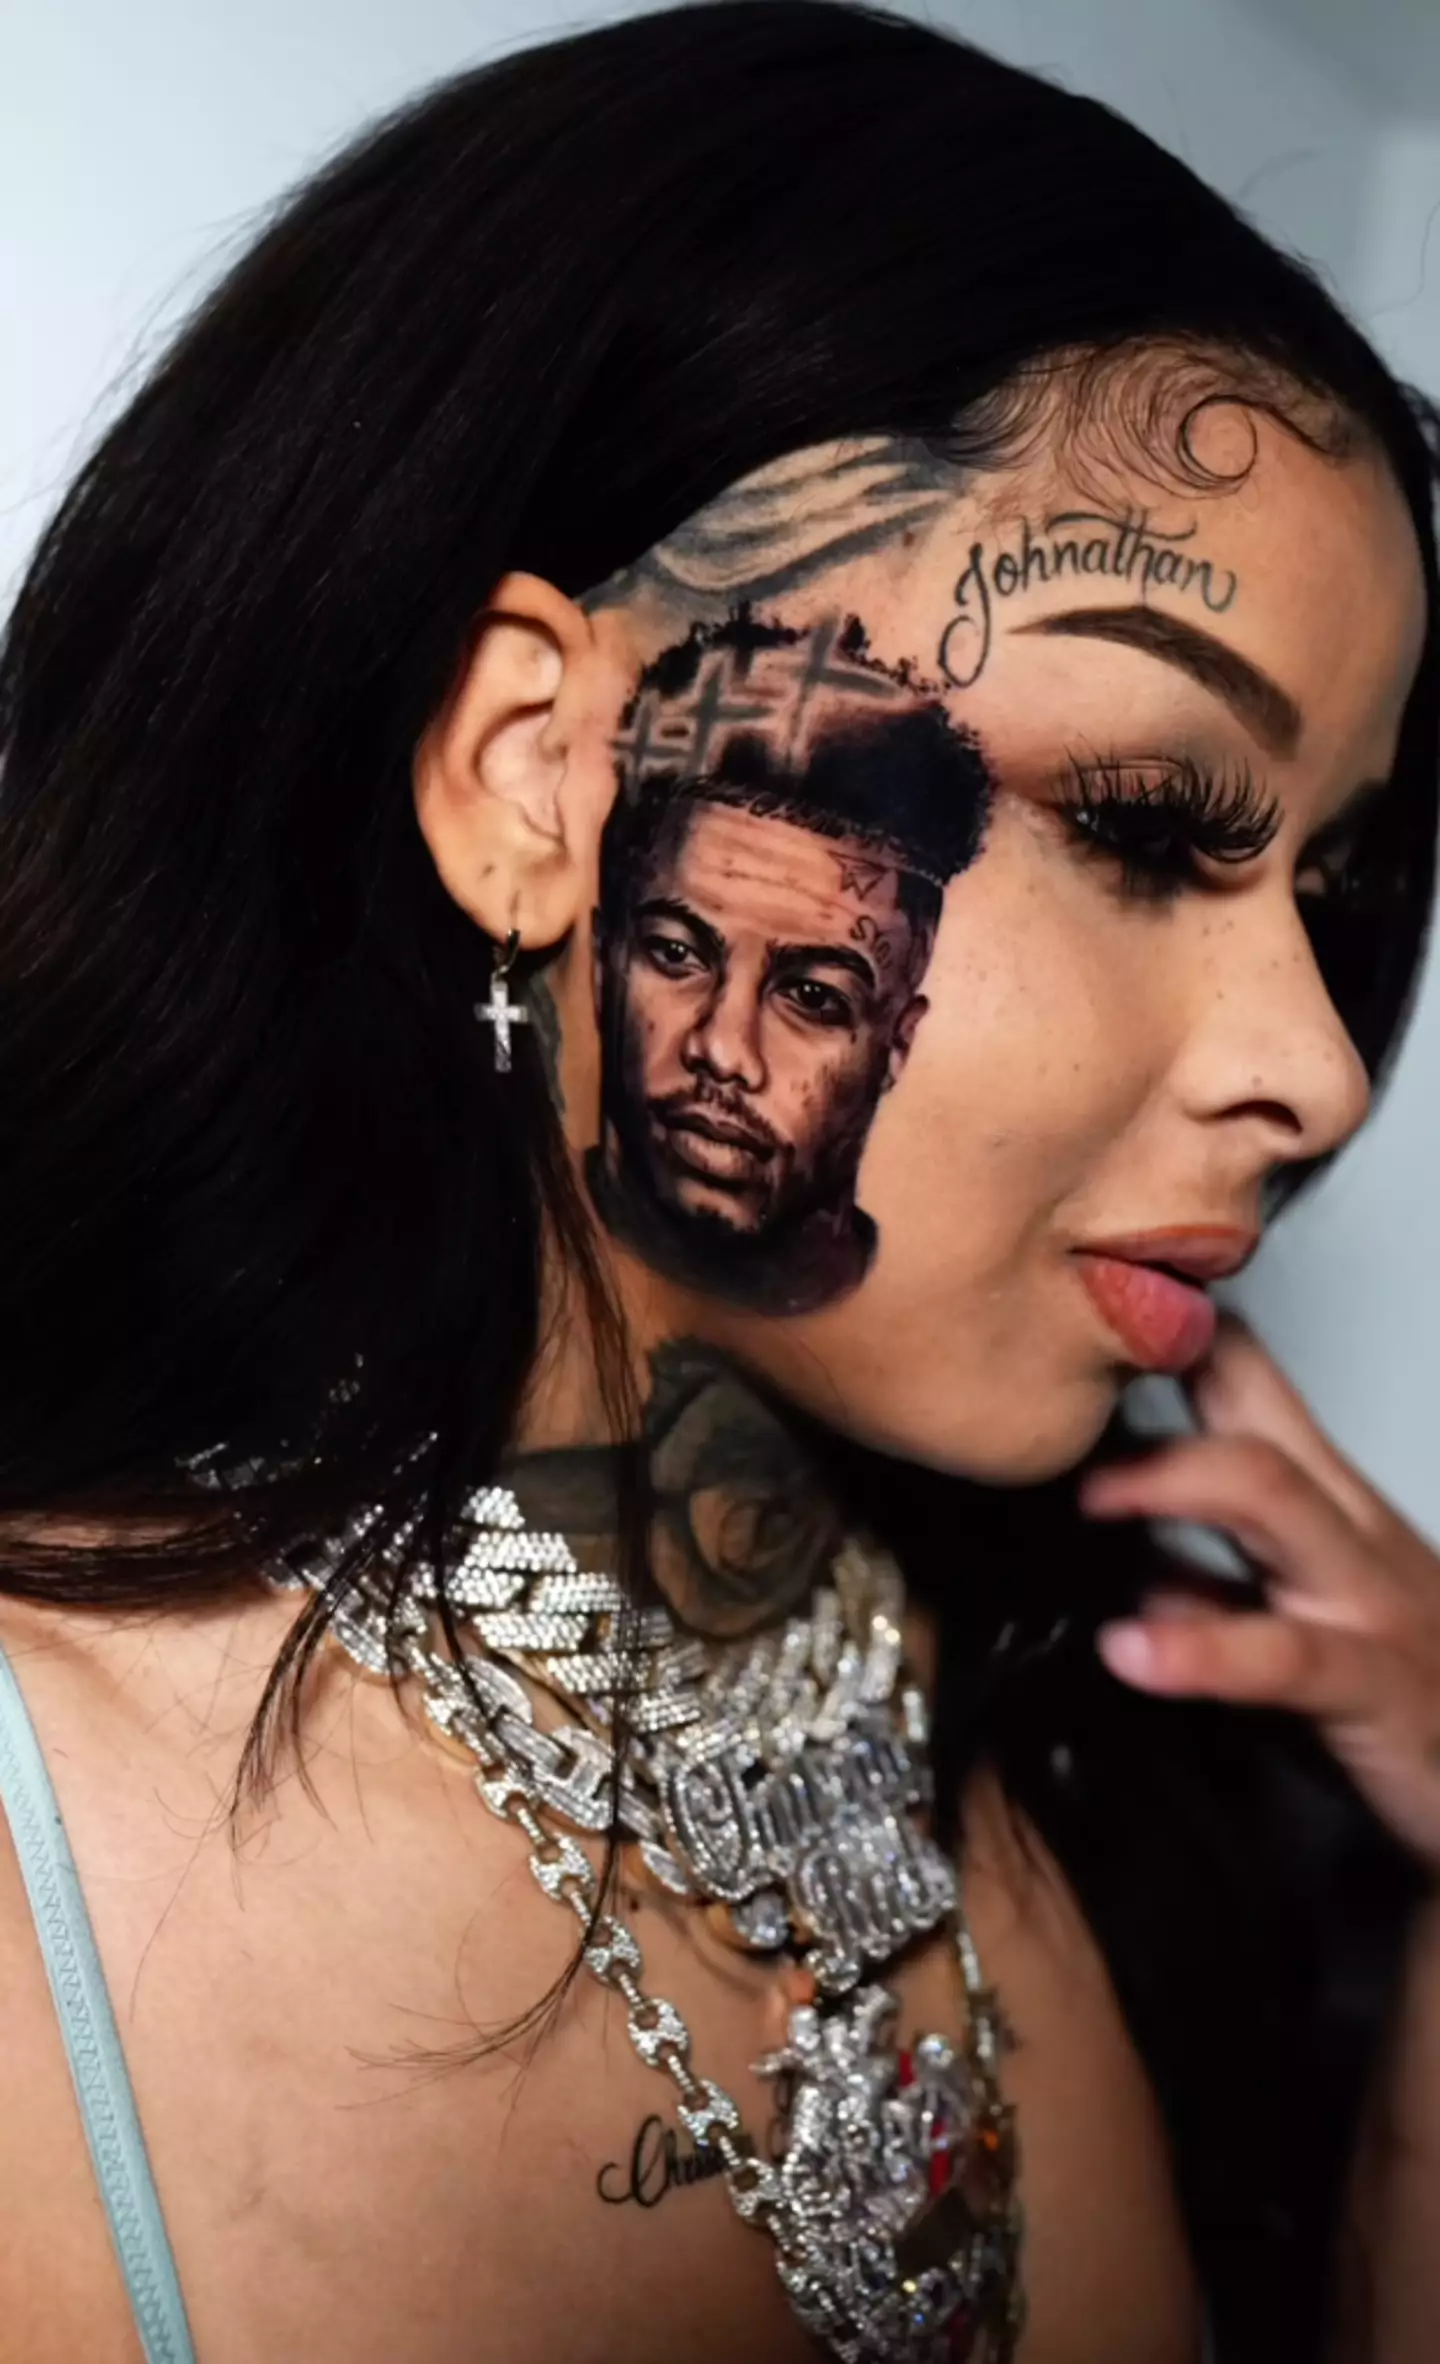 Blueface’s mother, Karlissa Saffold Harvey, has spoken out against the tattoo.